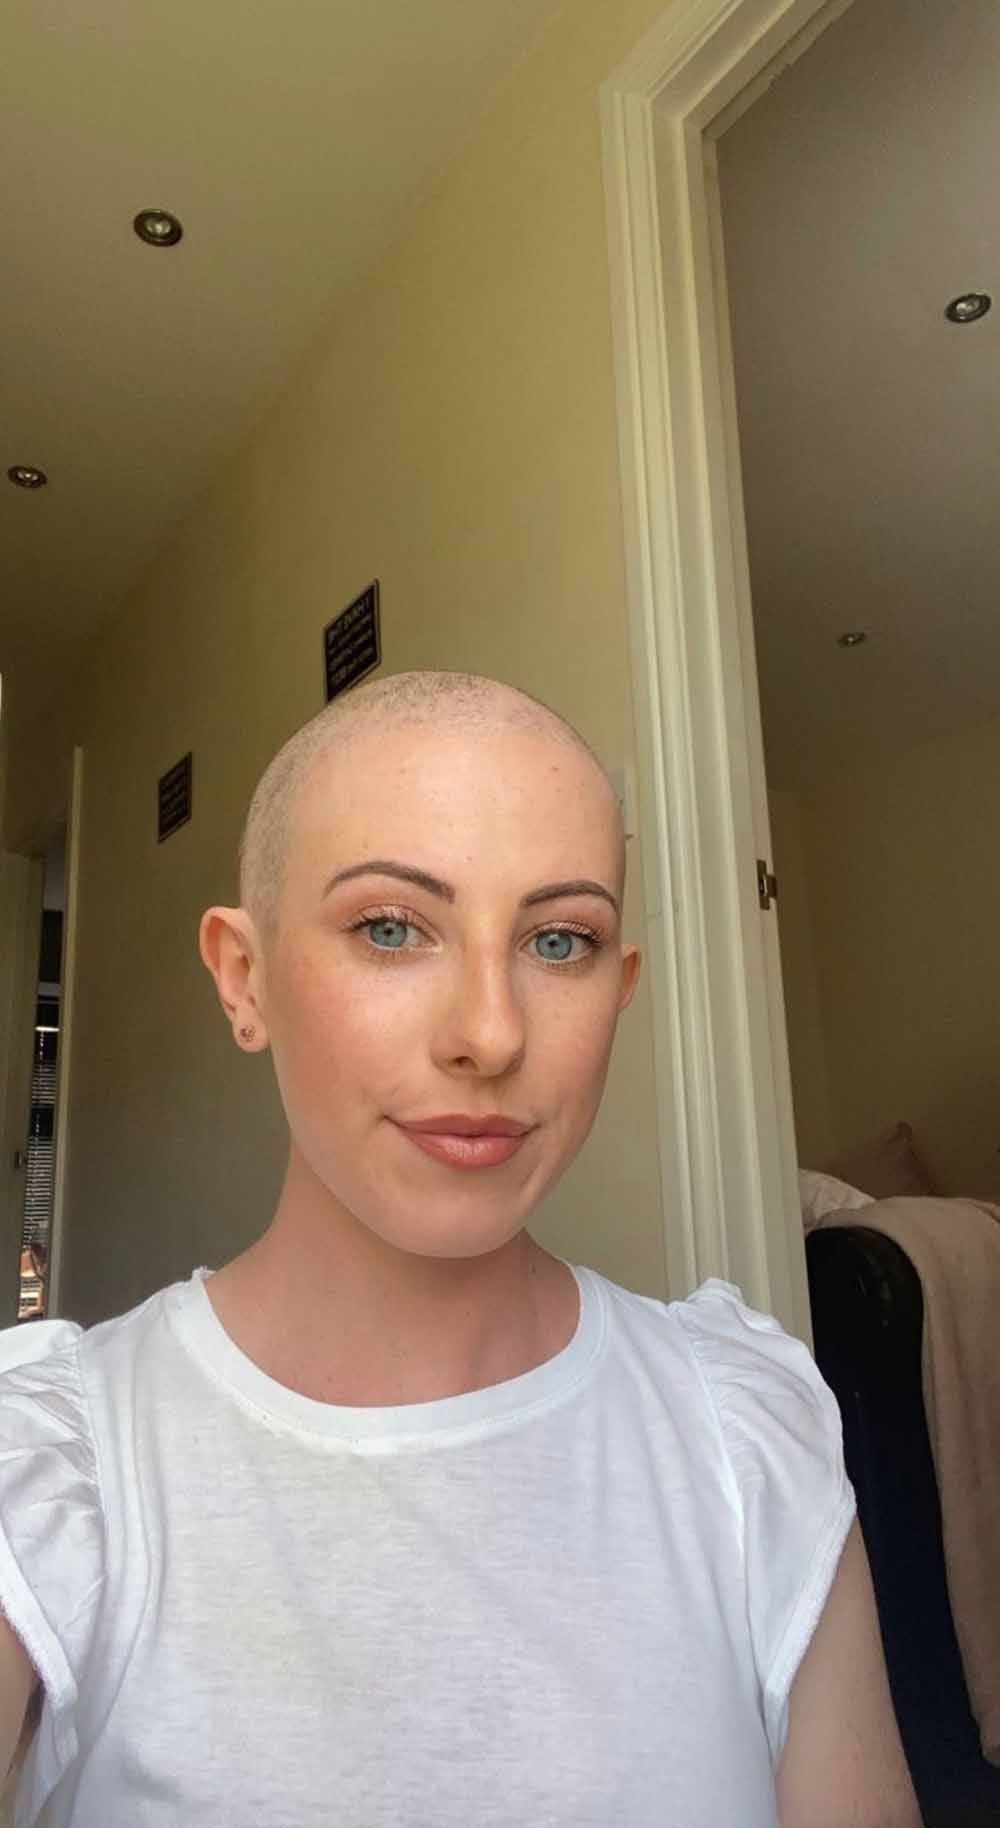 Siobhan lost her hair after her first round of chemo. (Collect/PA Real Life)